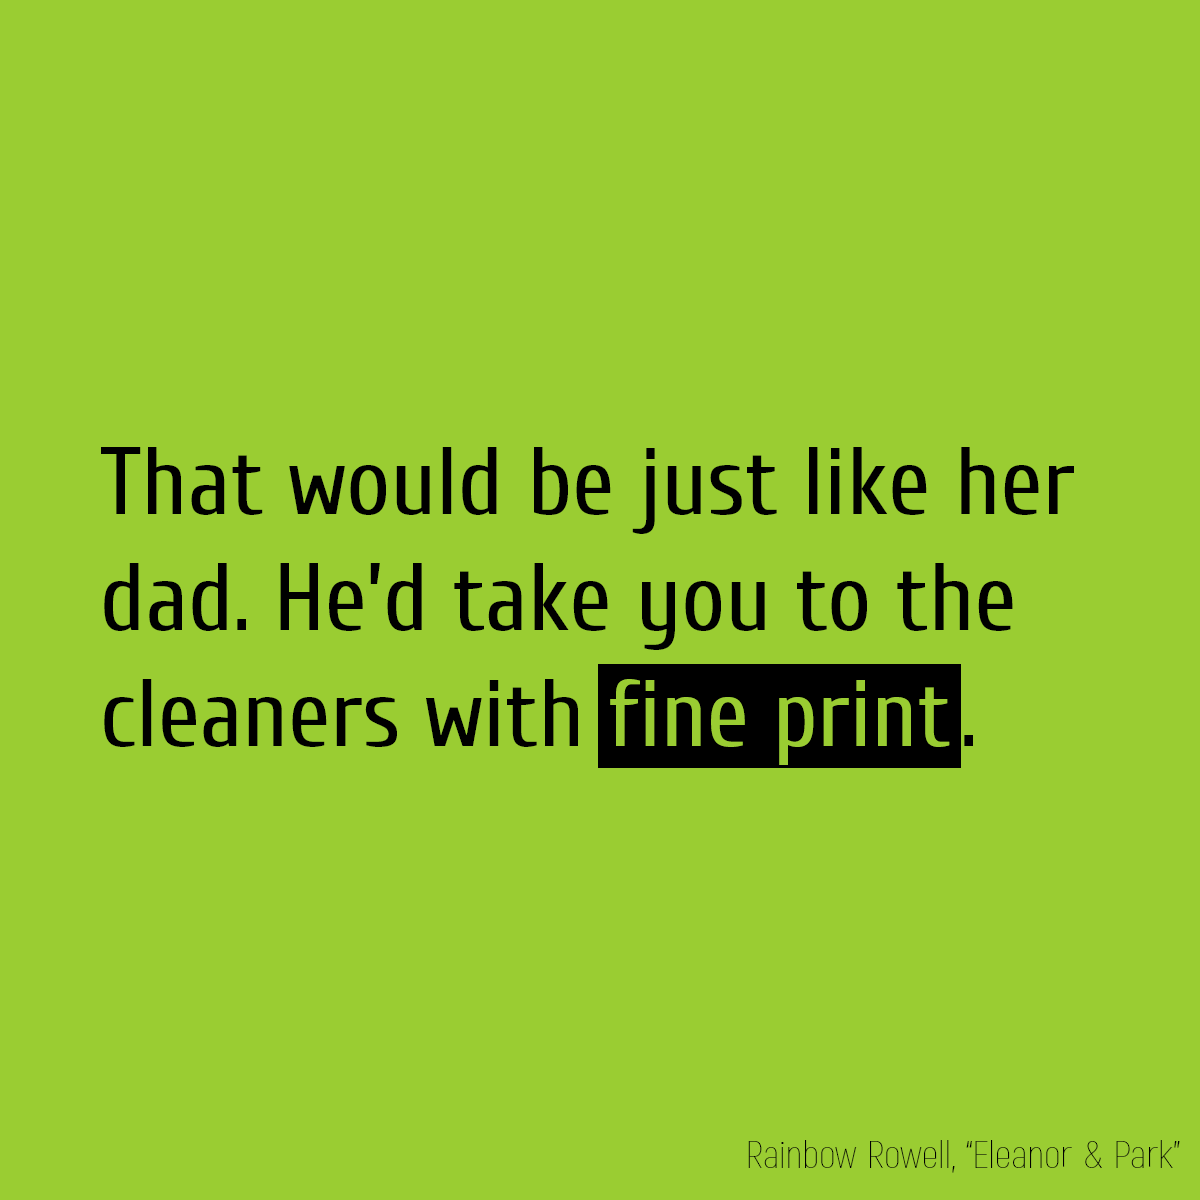 (That would be just like her dad. He’d take you to the cleaners with **fine print**.)